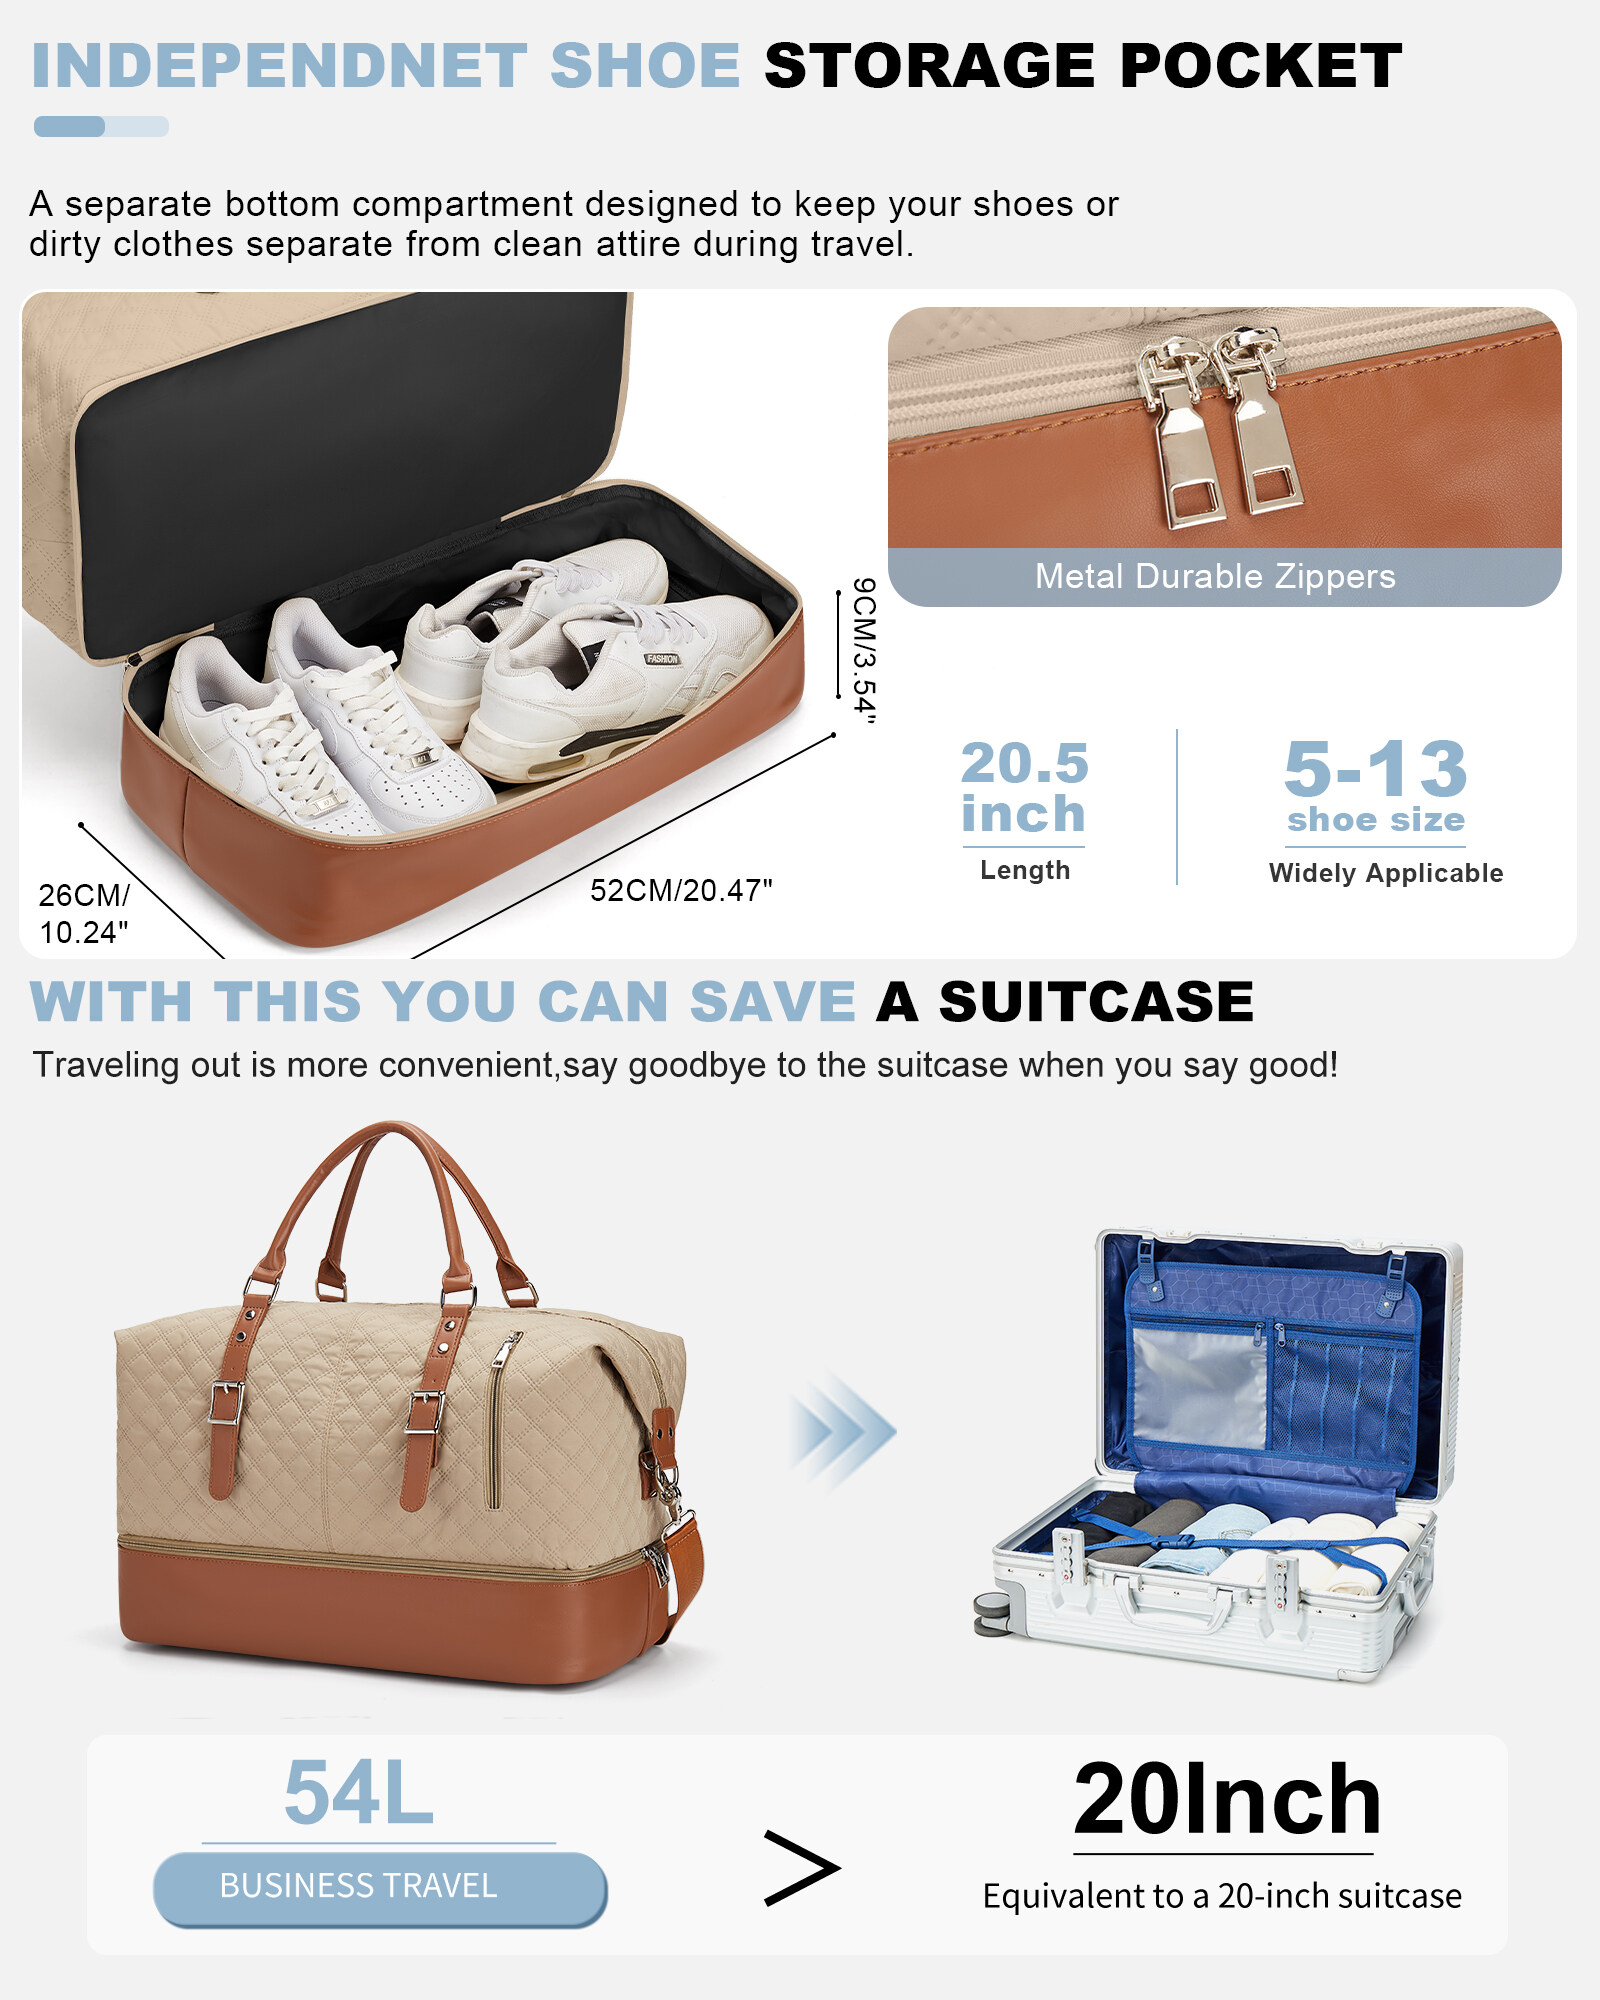 This weekender bag has compartments for your shoes, laptop and